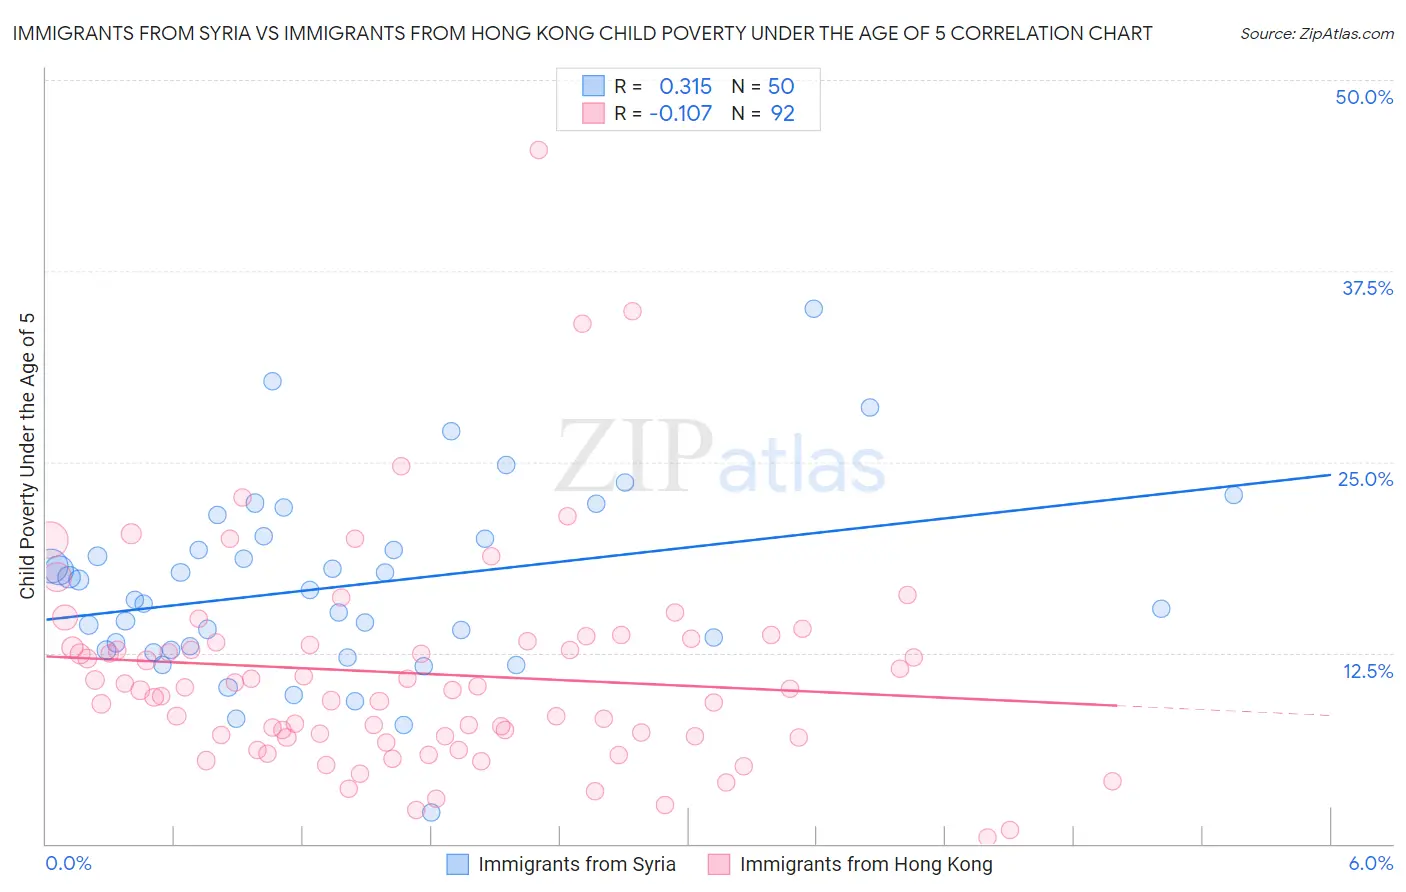 Immigrants from Syria vs Immigrants from Hong Kong Child Poverty Under the Age of 5